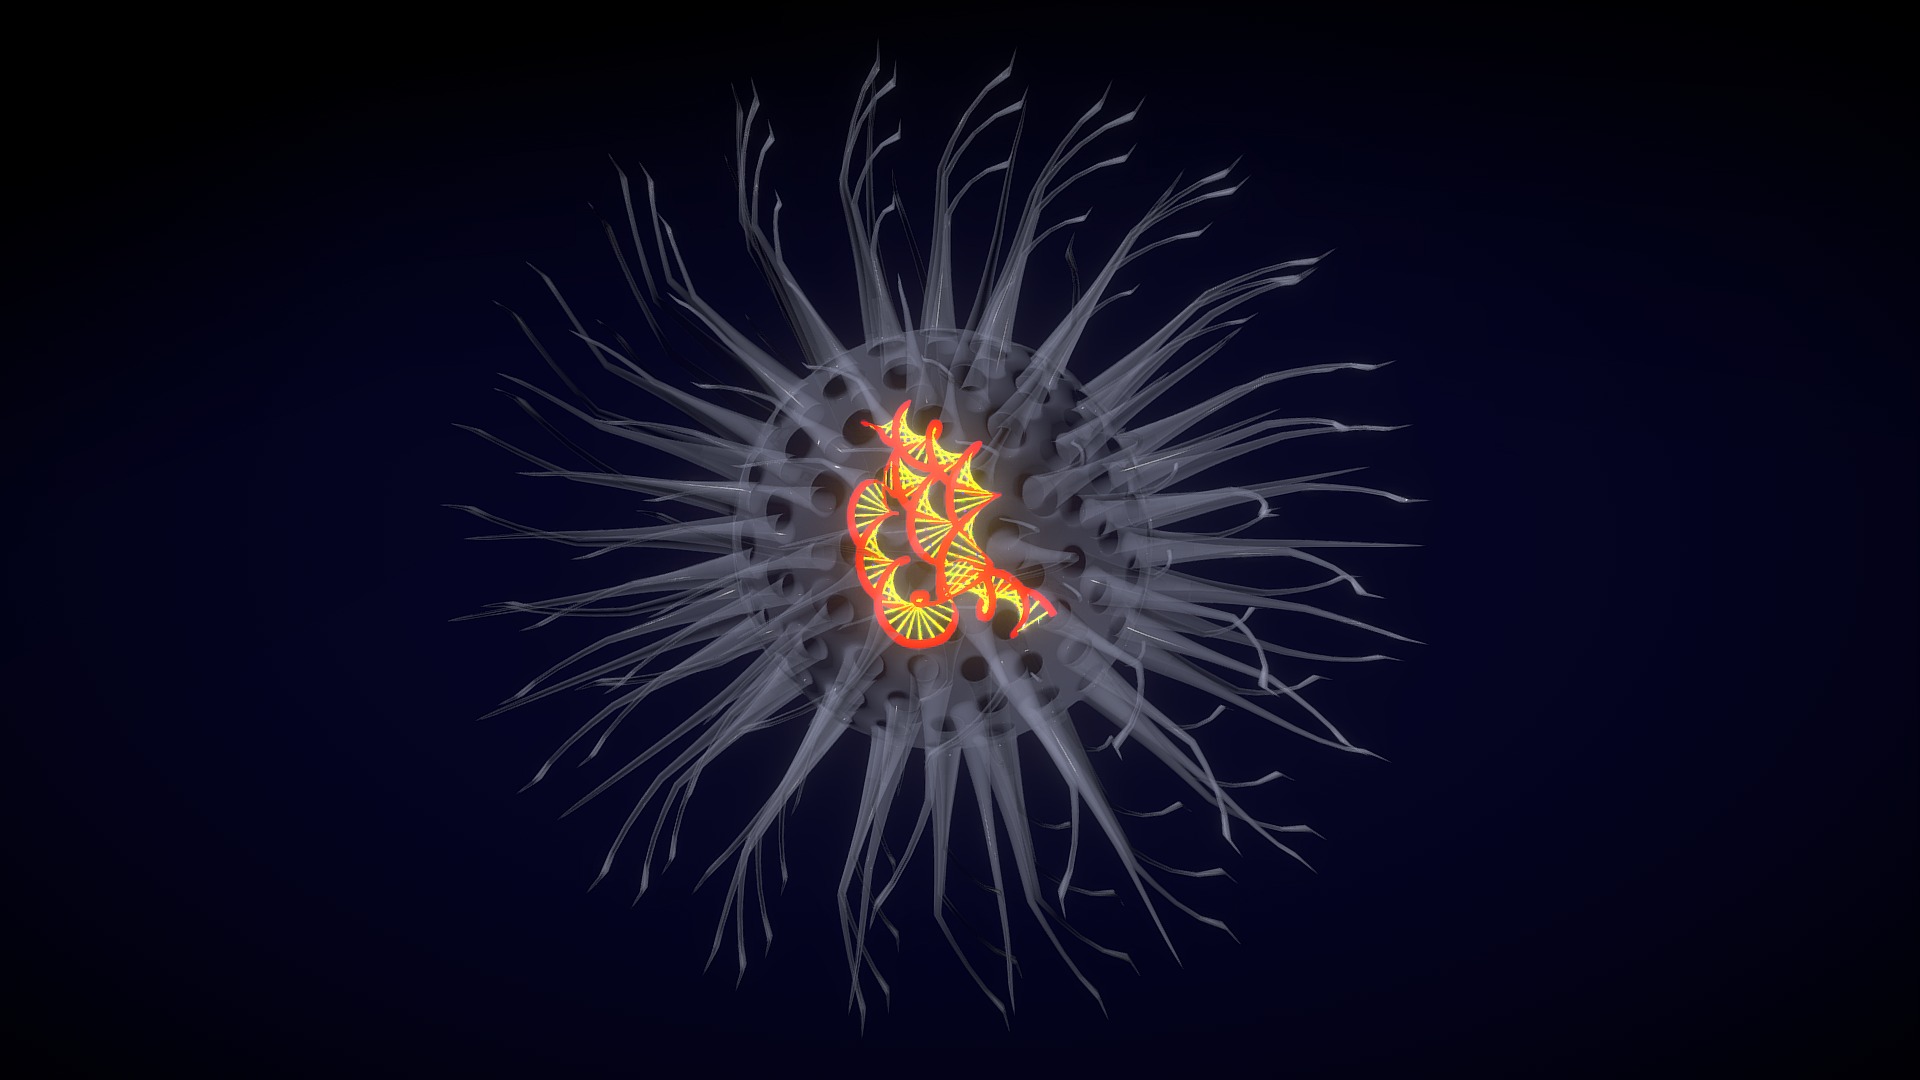 3D model Virus With DNA helix and labelling - This is a 3D model of the Virus With DNA helix and labelling. The 3D model is about a white and orange fireworks display.